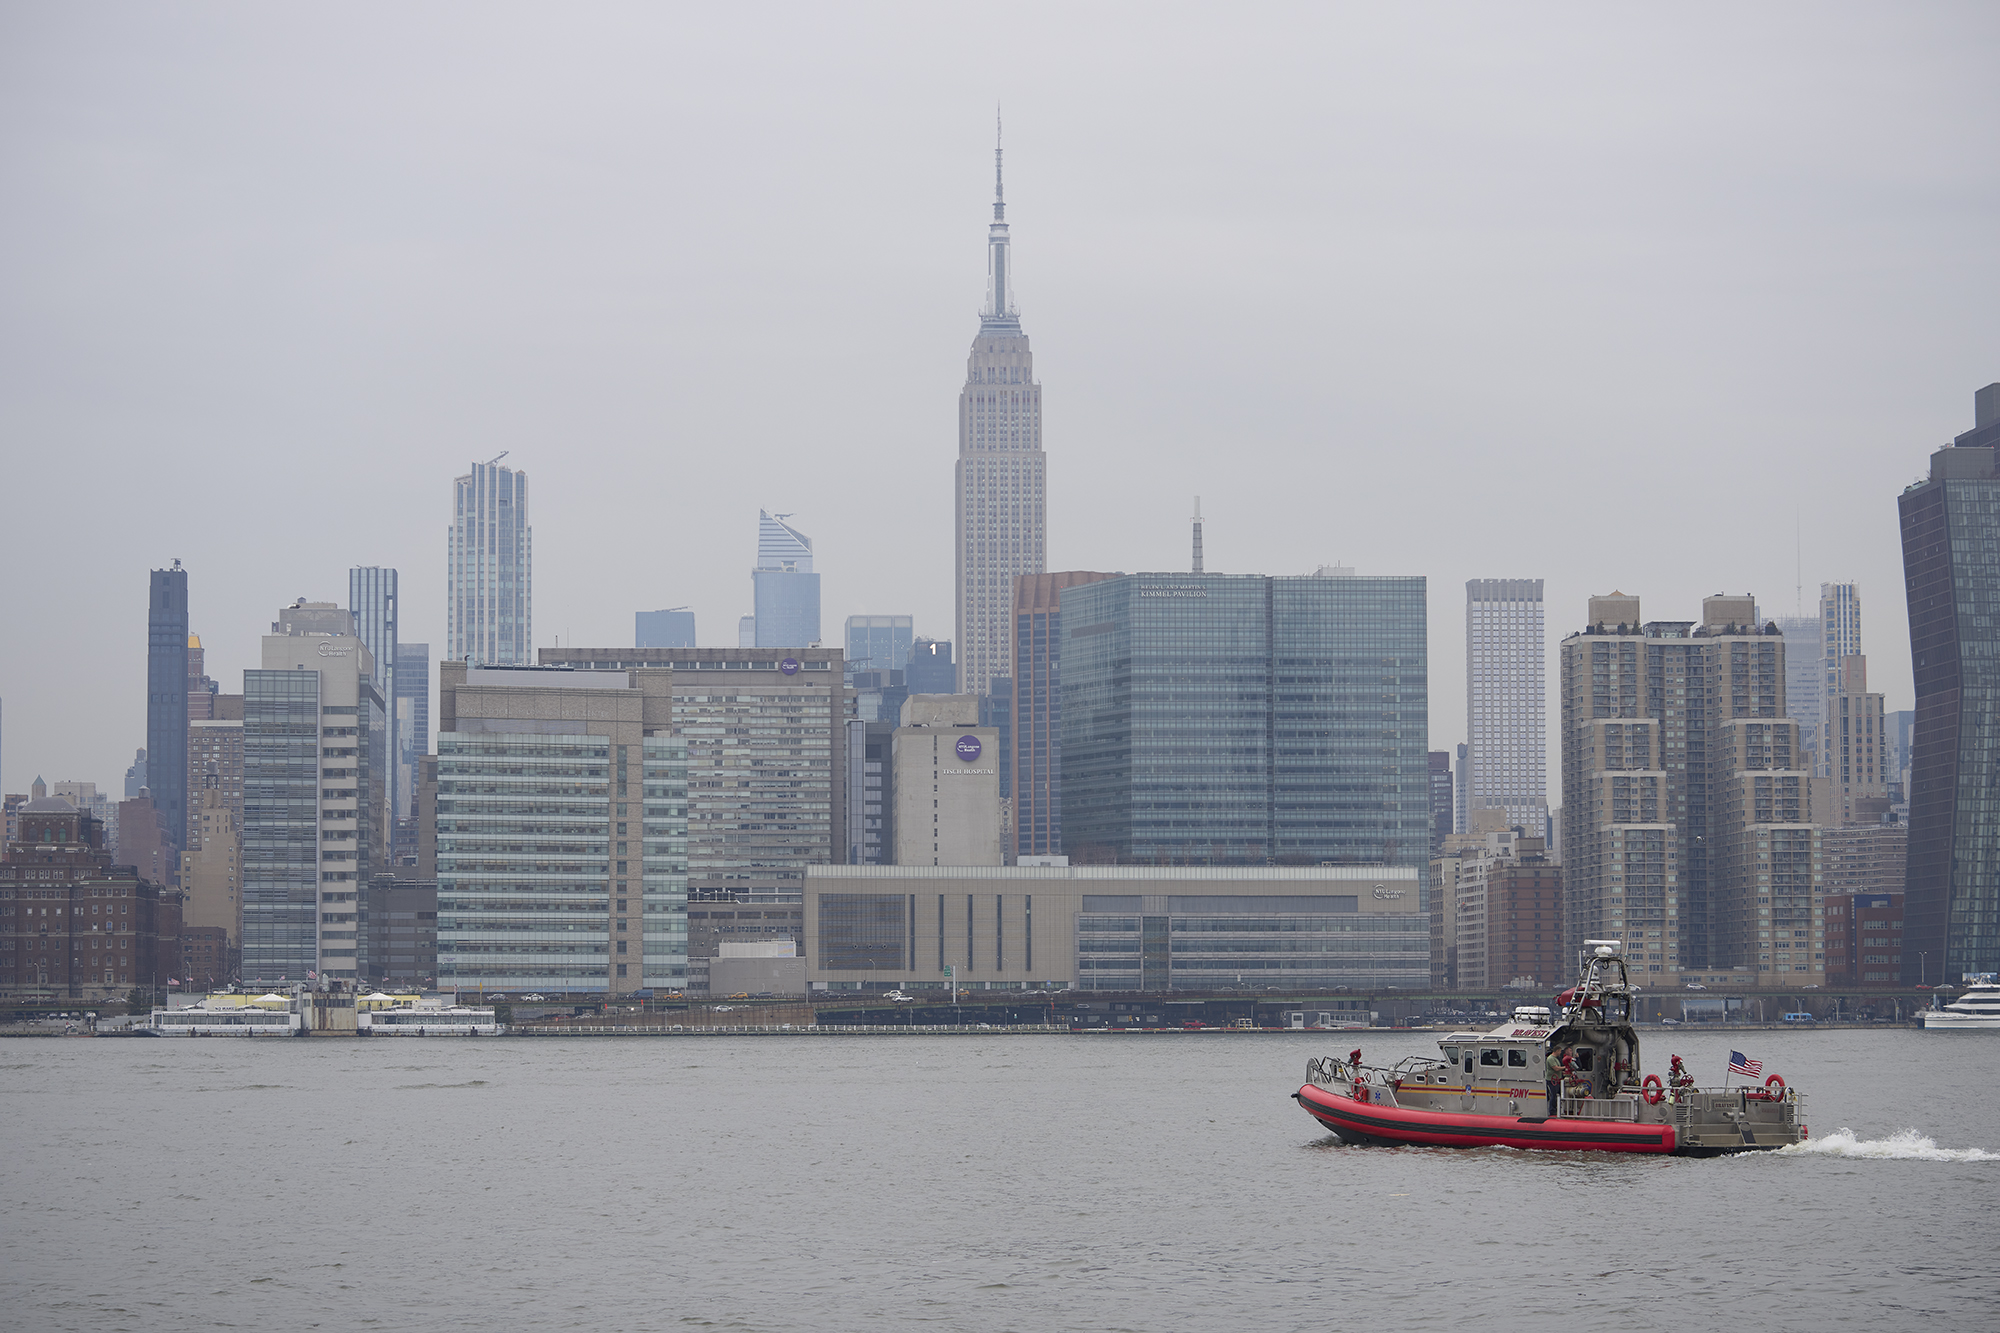 The Fire Boat